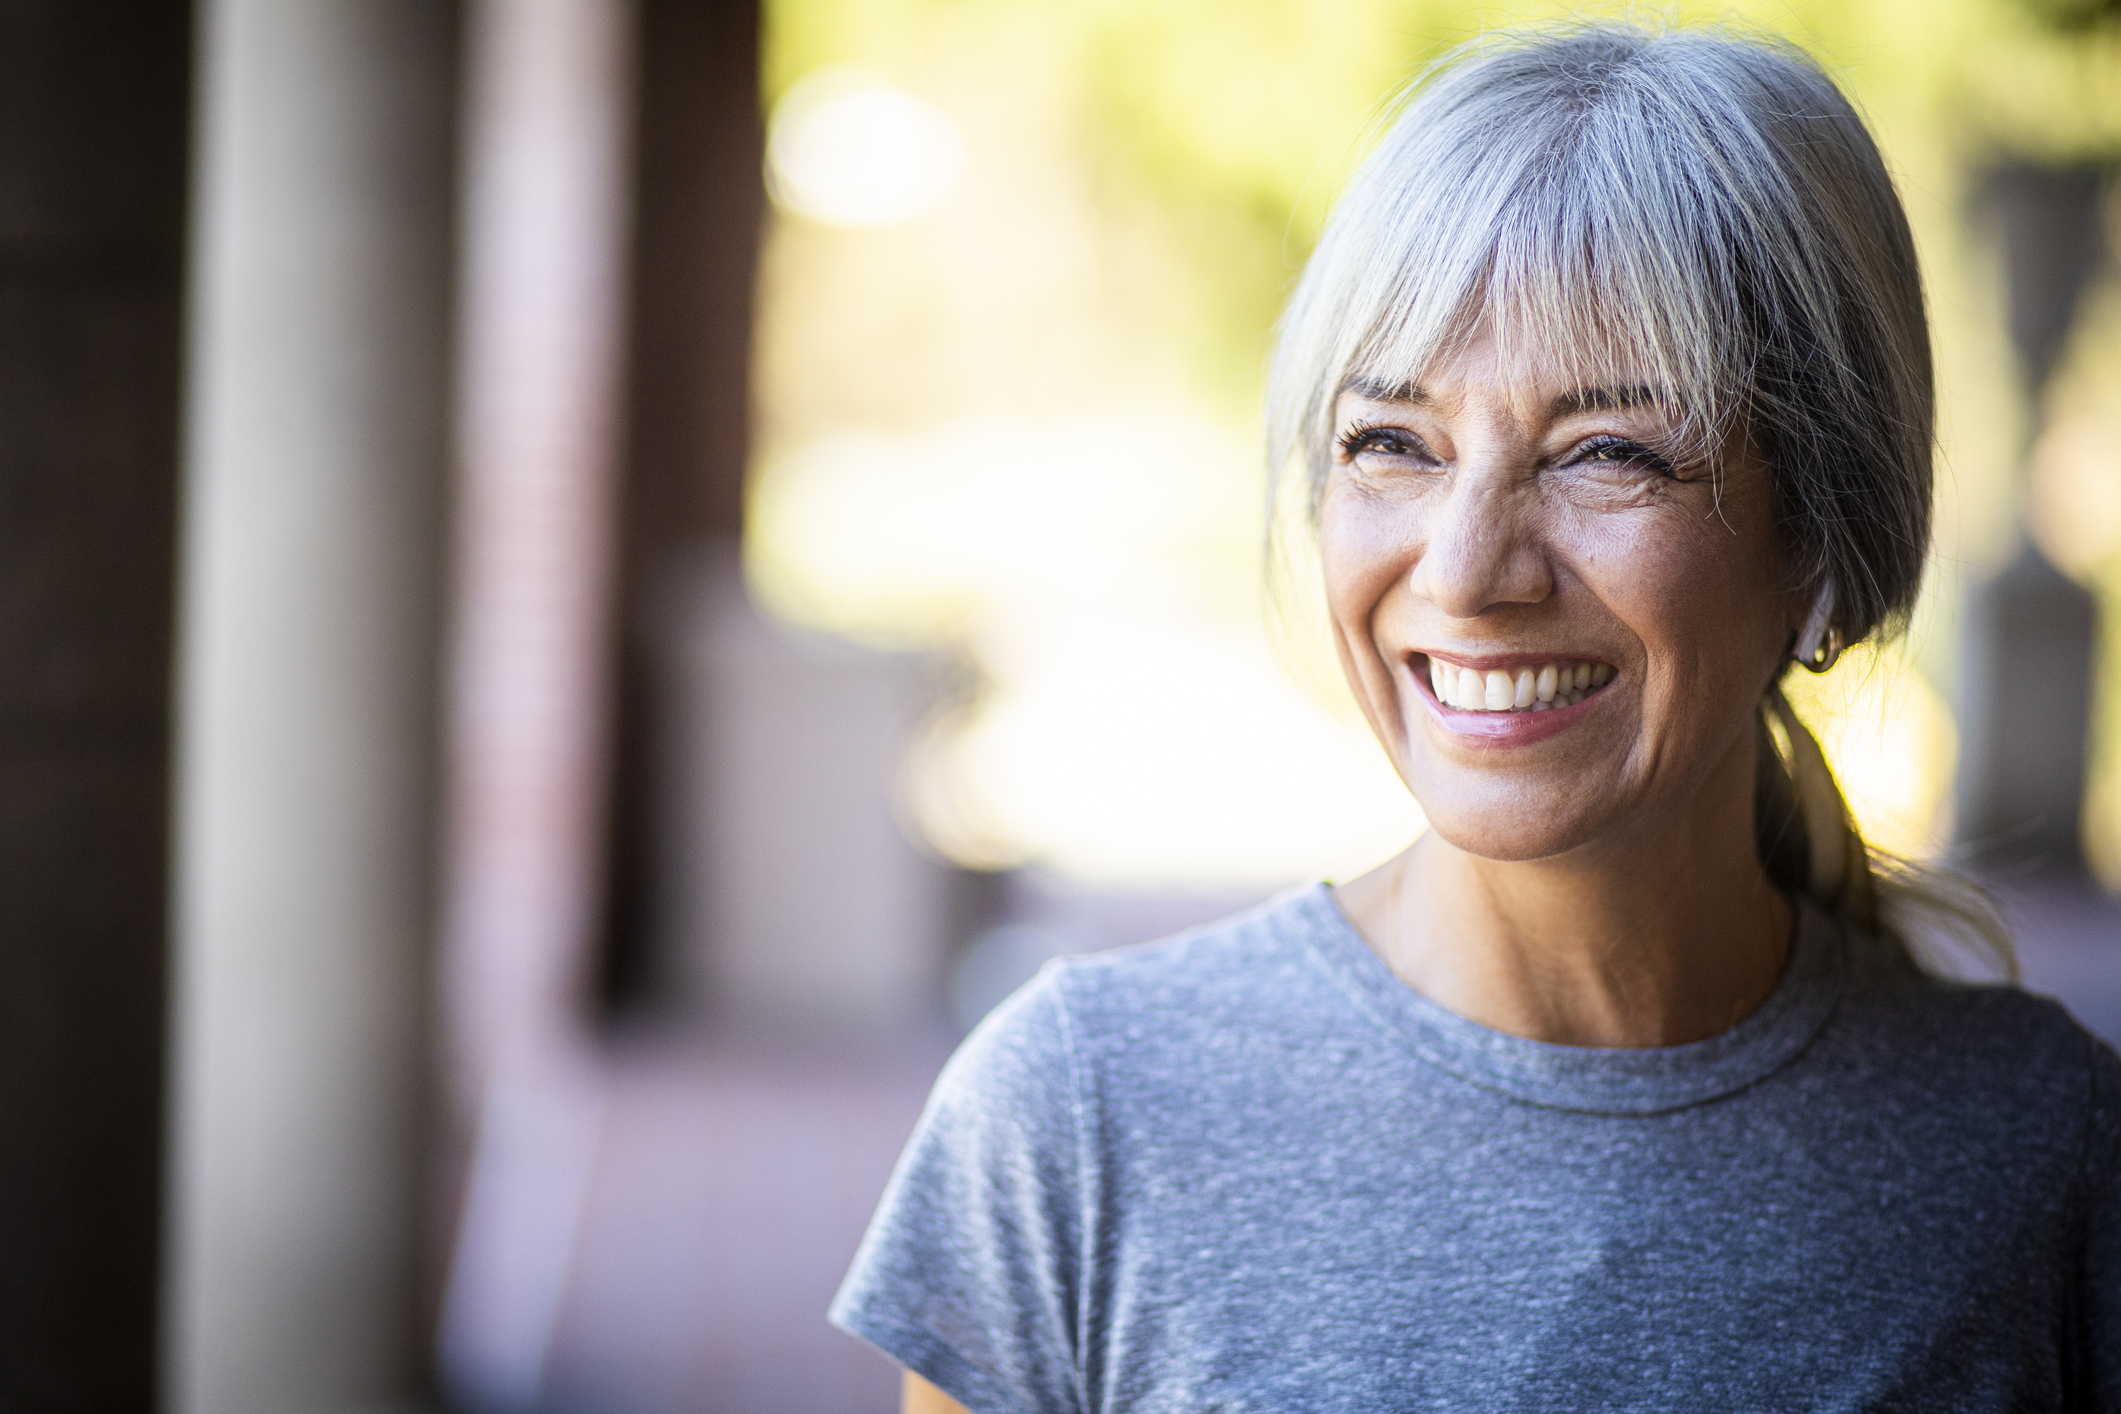 Over 60? 15 minutes can make or break your senior years